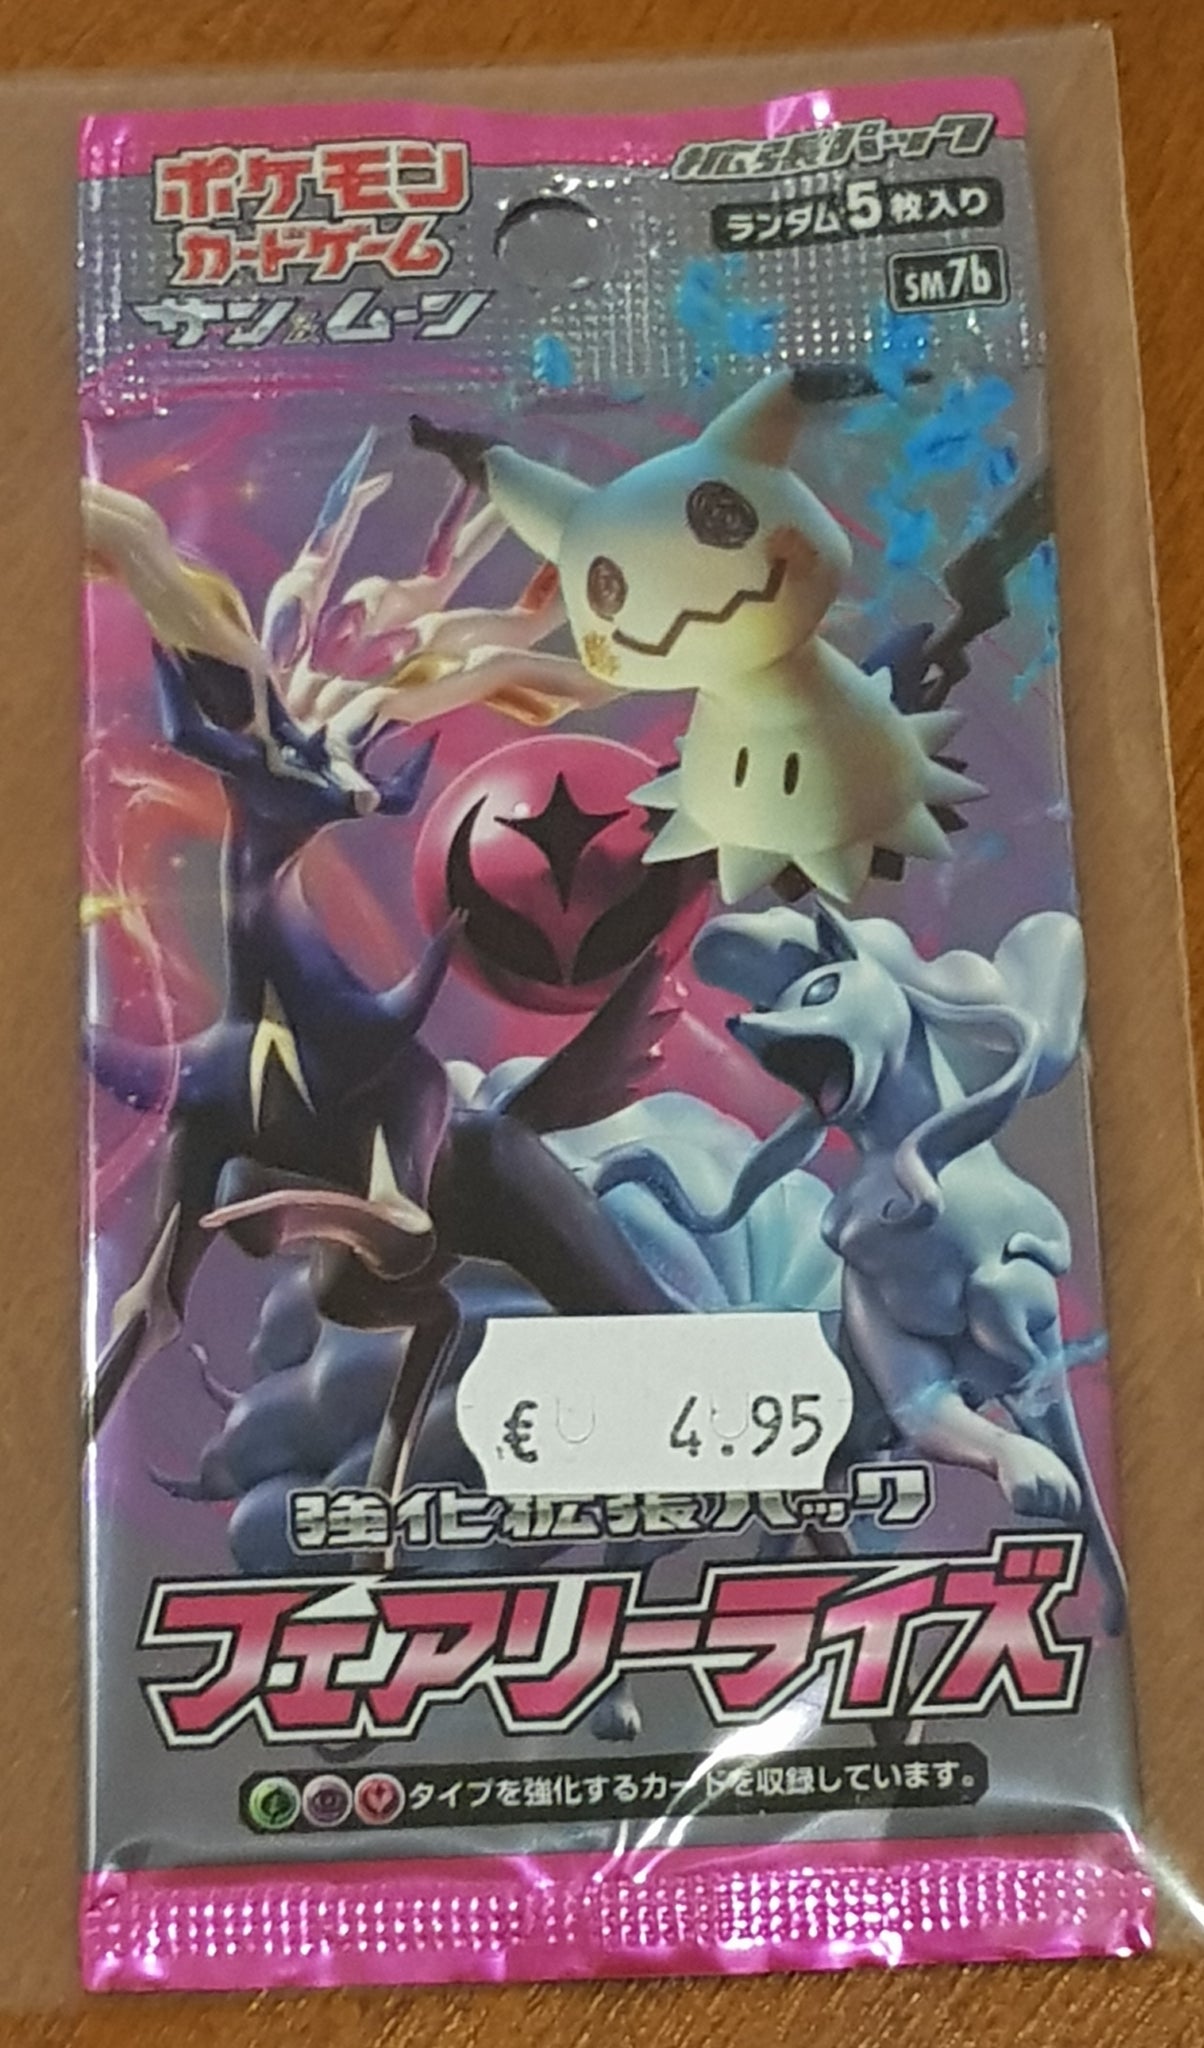 Pokemon Sun and Moon Fairy Rise Sealed Japanese (SM7b) Trading Card Pack